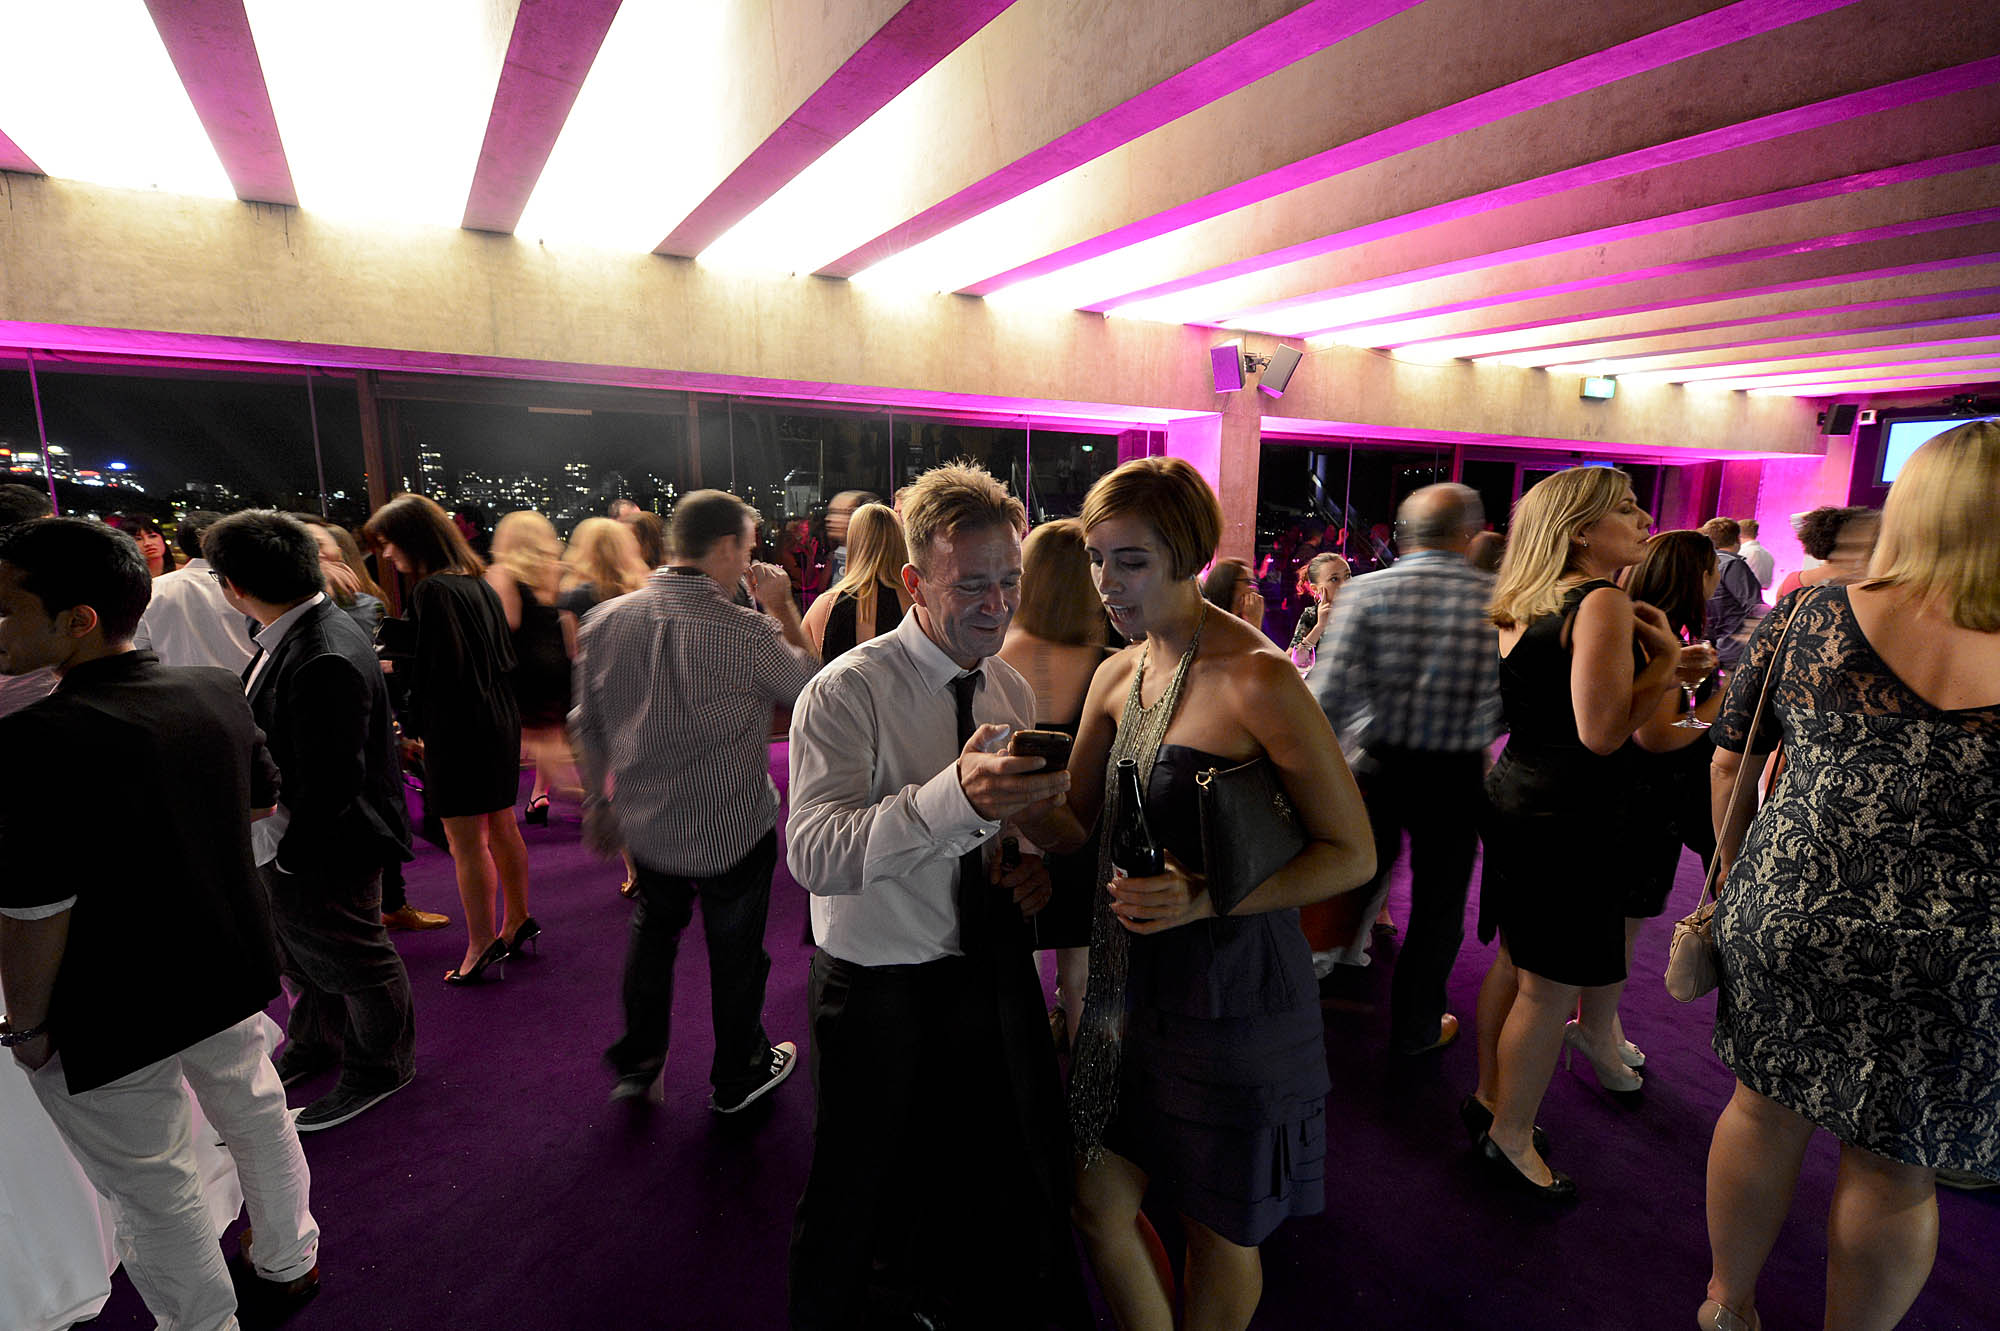 People Dating at the Biggest Blind Date, a Guinness Record Breaking event